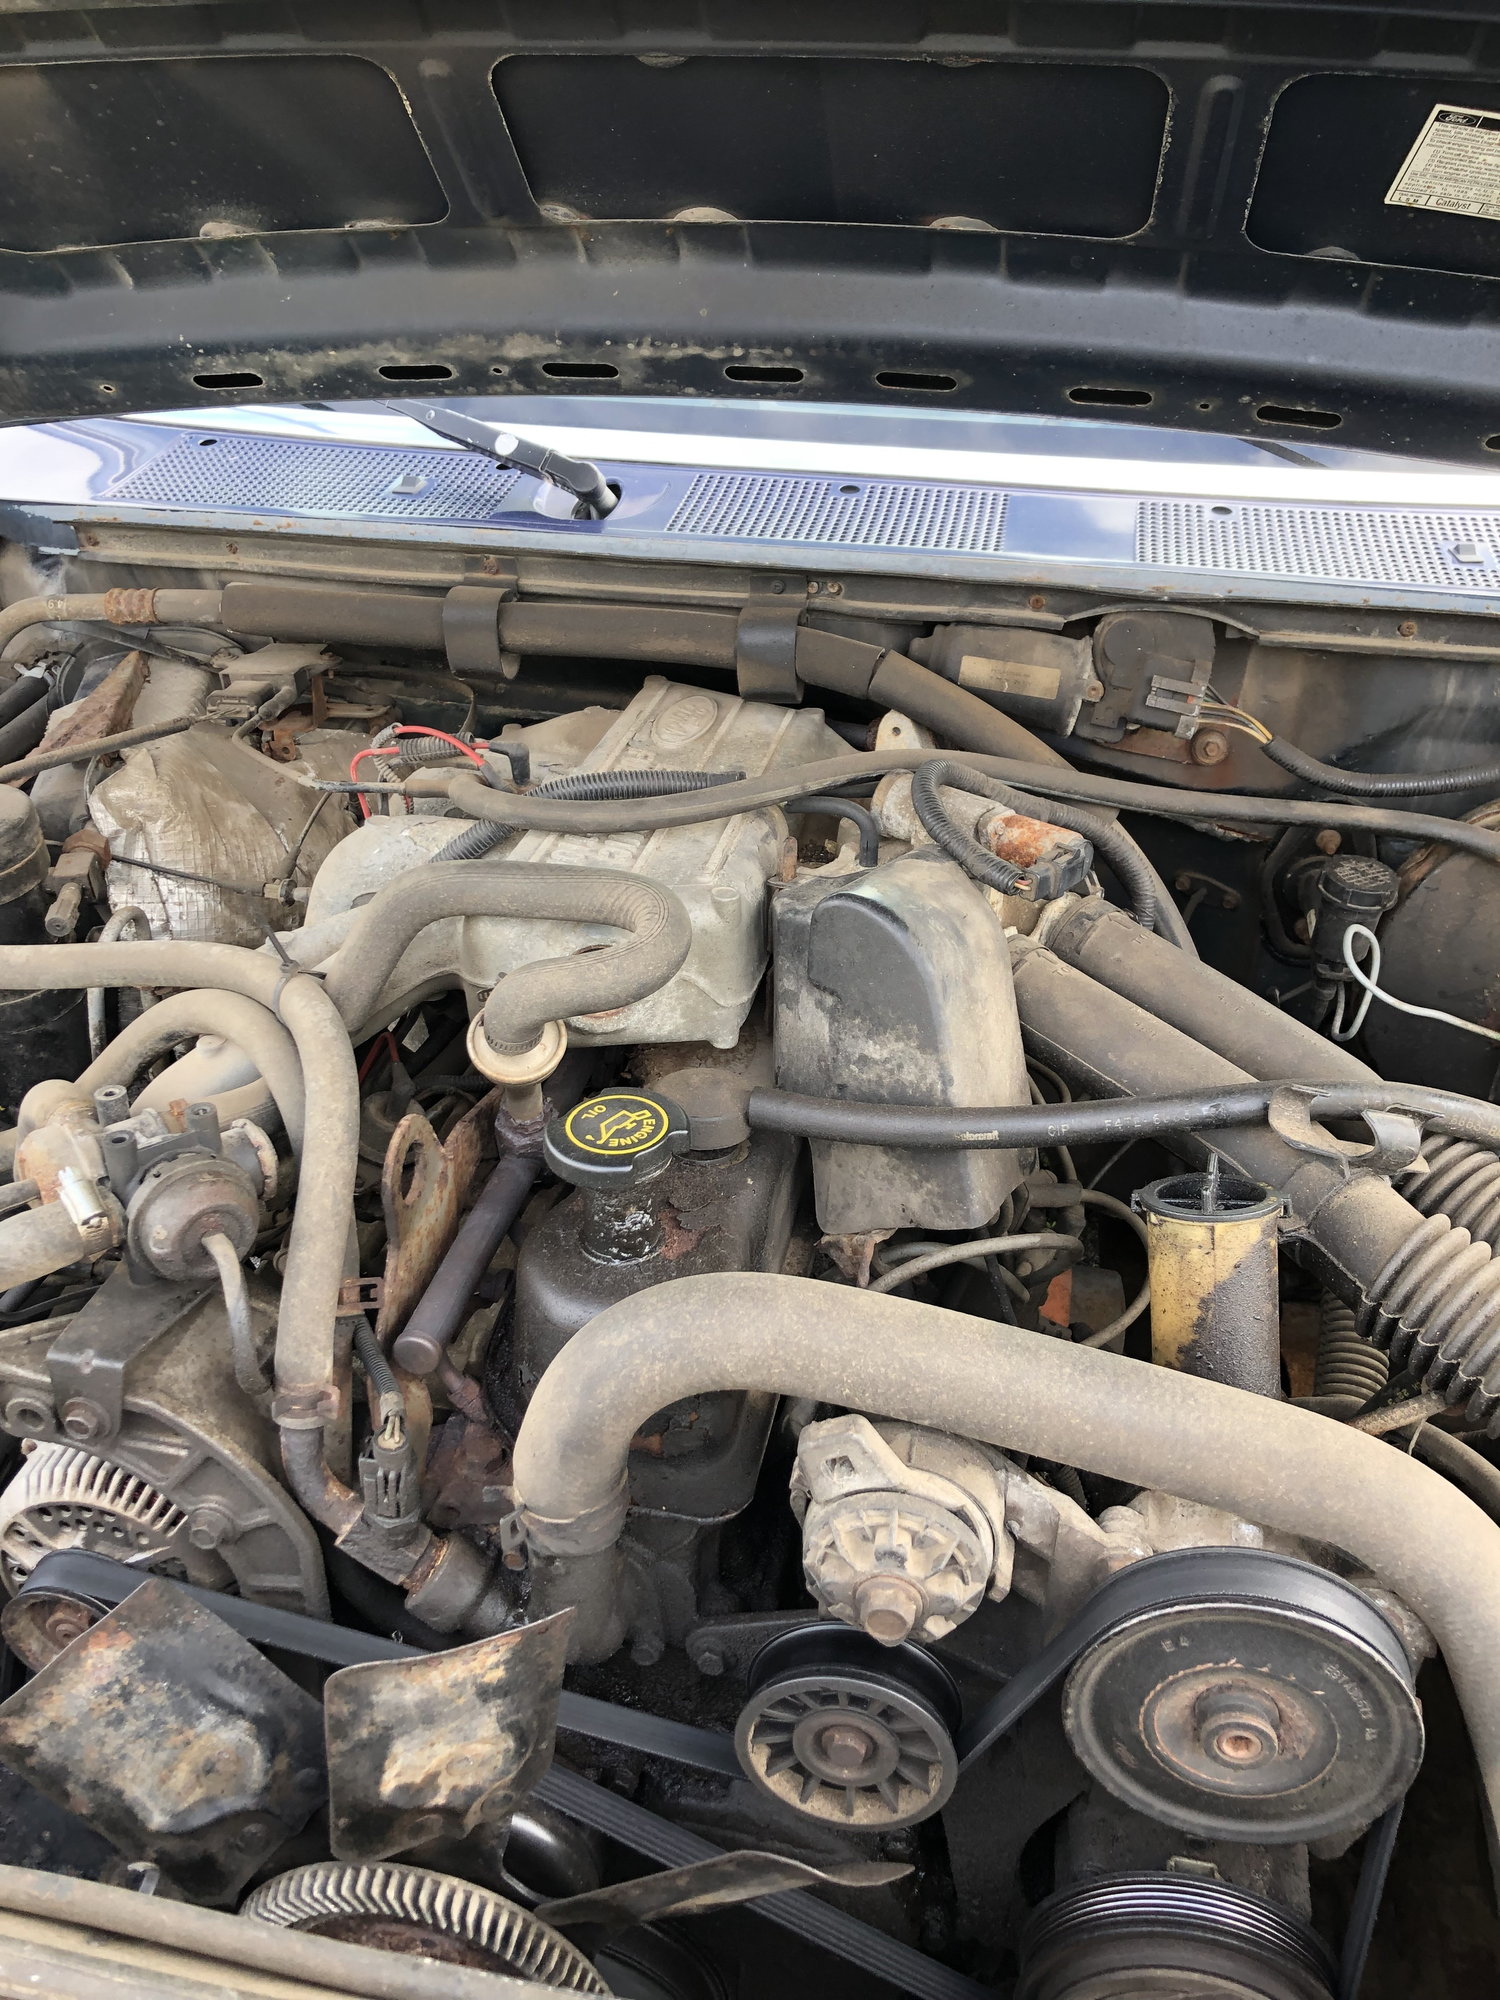 2014 Ford F-250 Super Duty - Parting out 95 f150 - Boonville, NY 13309, United States